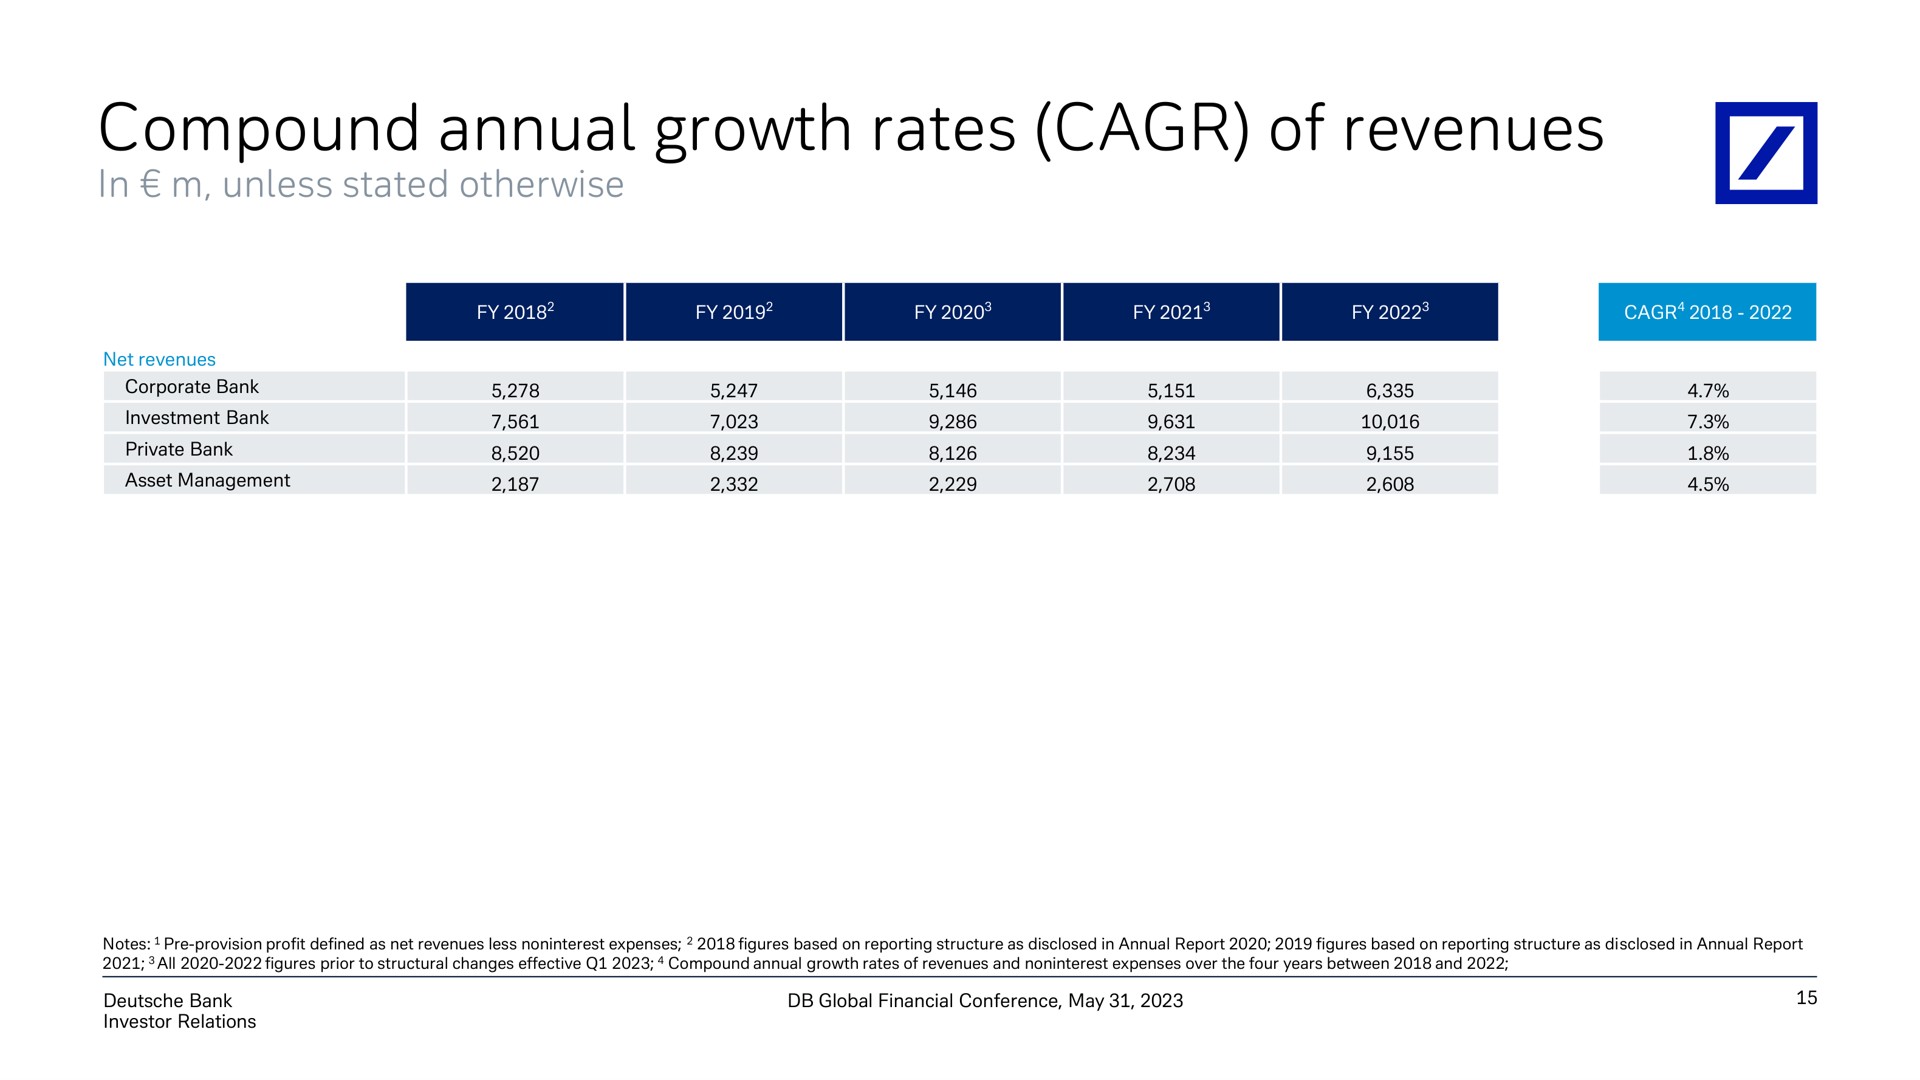 compound annual growth rates of revenues | Deutsche Bank